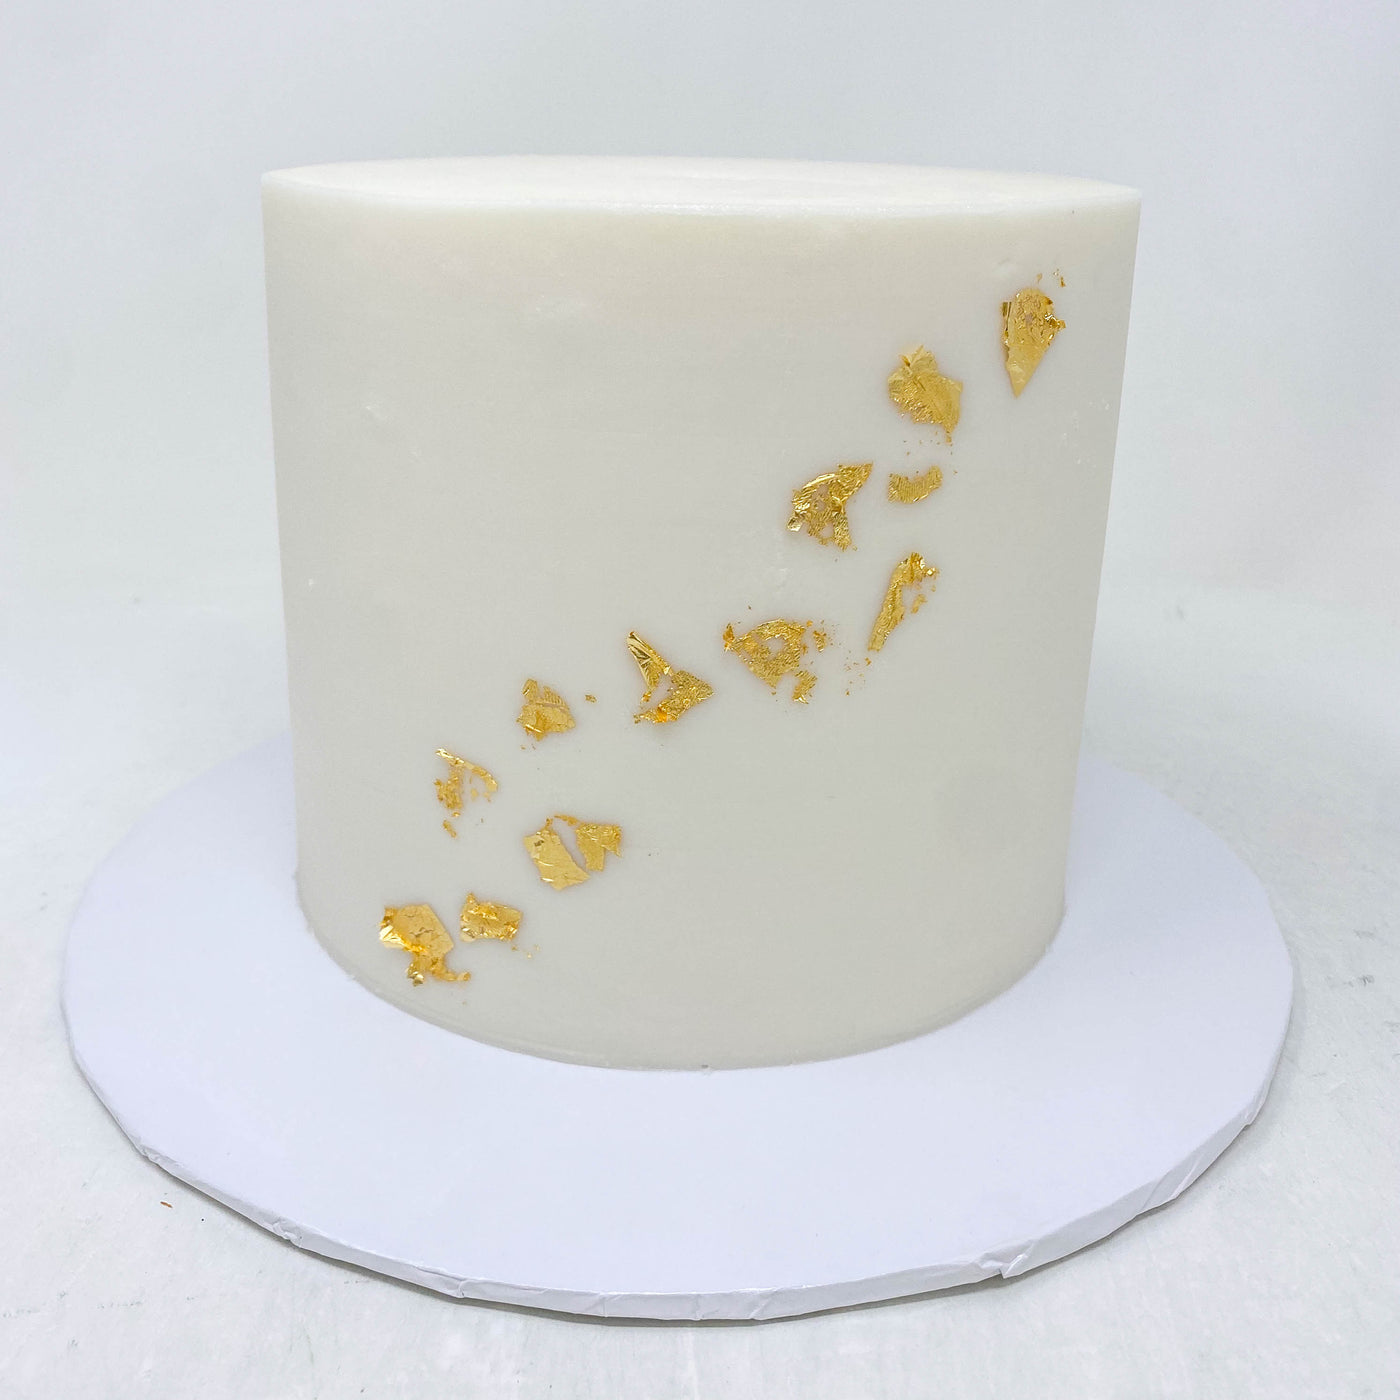 Plain Buttercream Cake with Gold Flakes